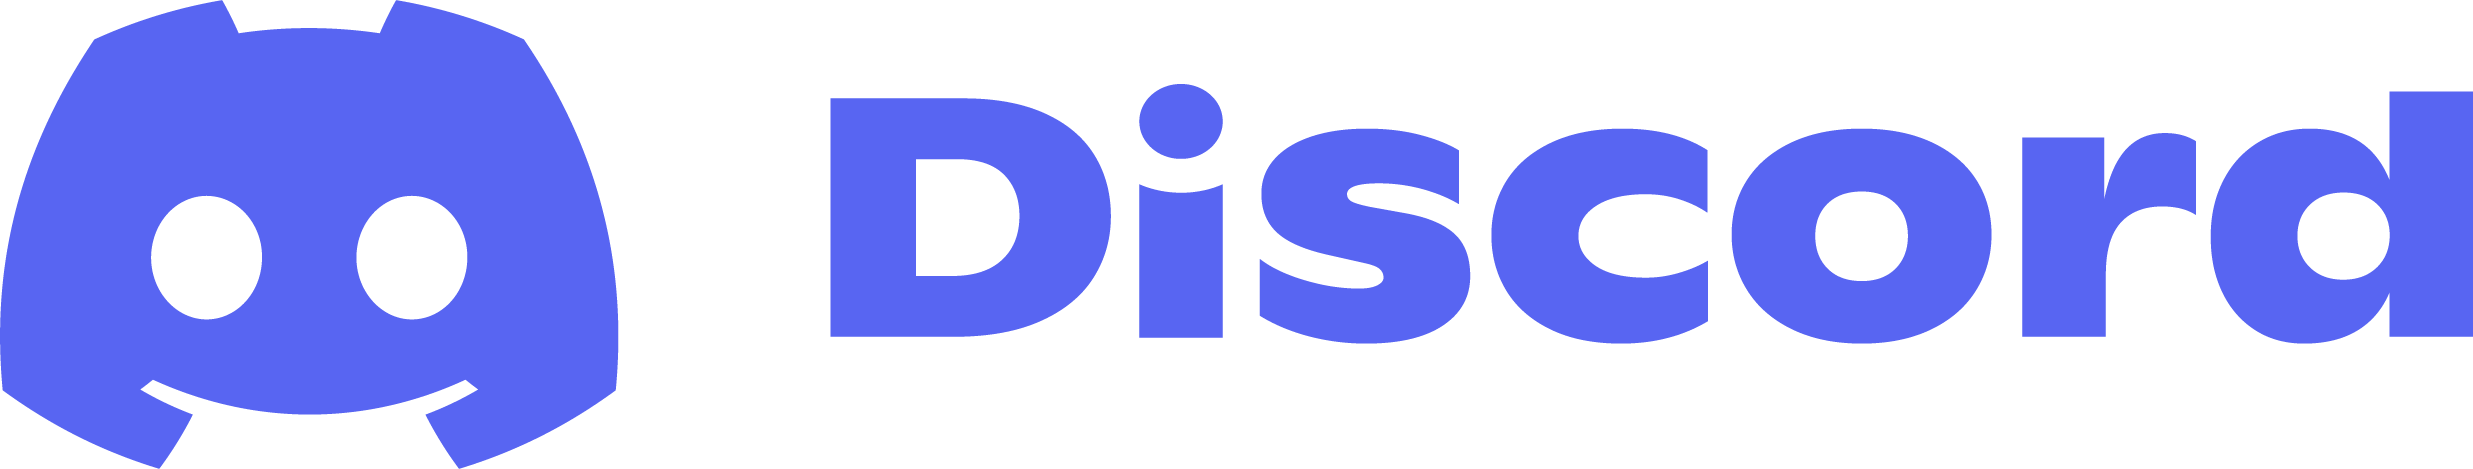 ../../_images/Discord-logo.png